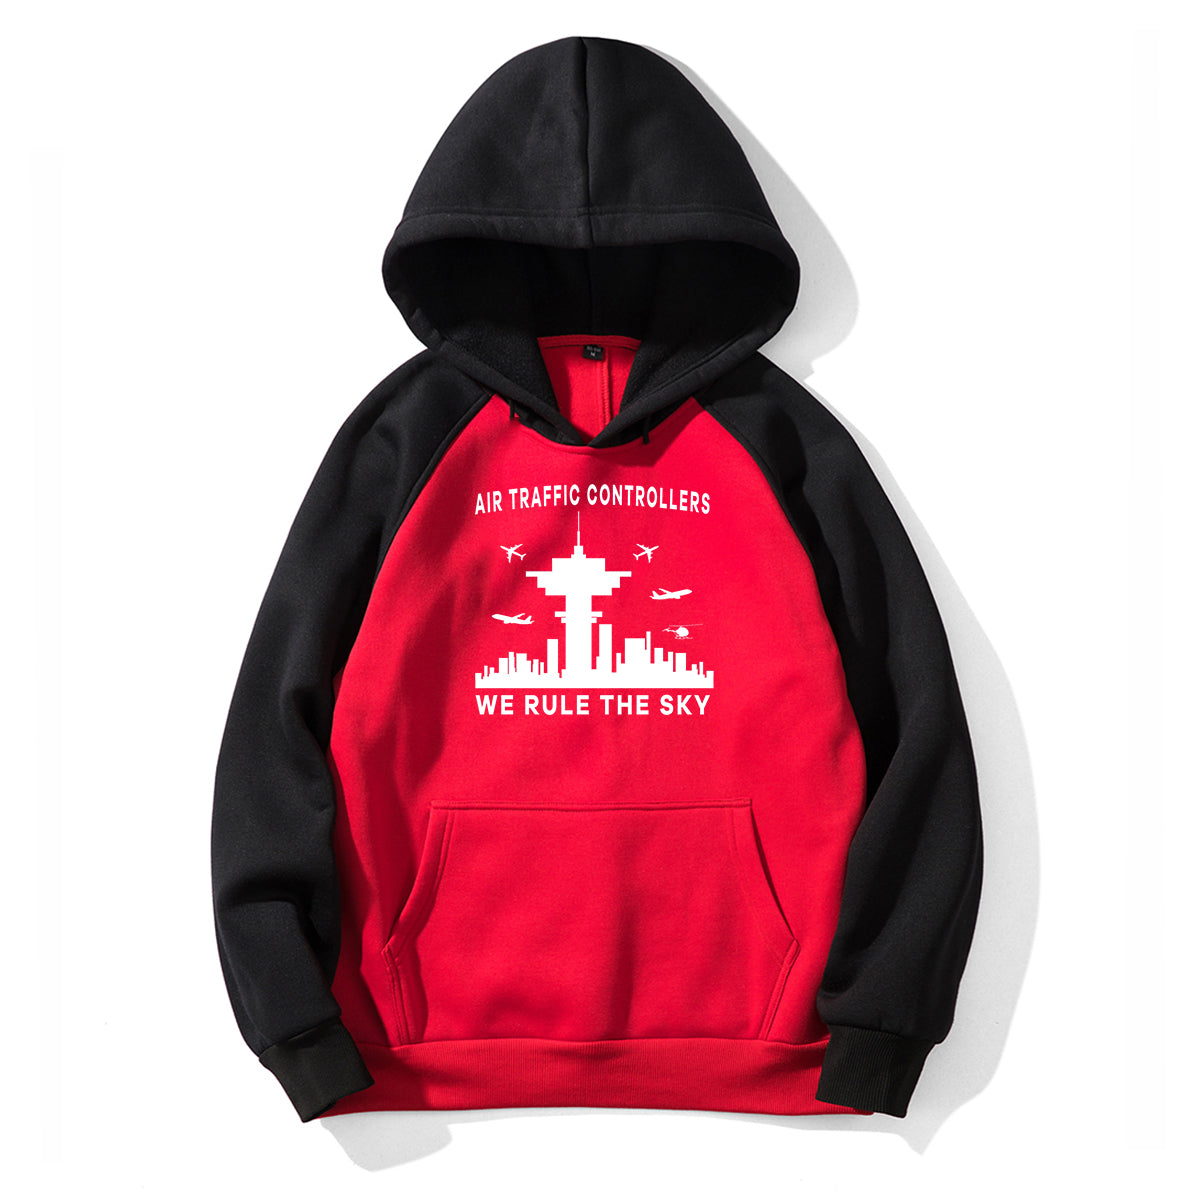 Air Traffic Controllers - We Rule The Sky Designed Colourful Hoodies